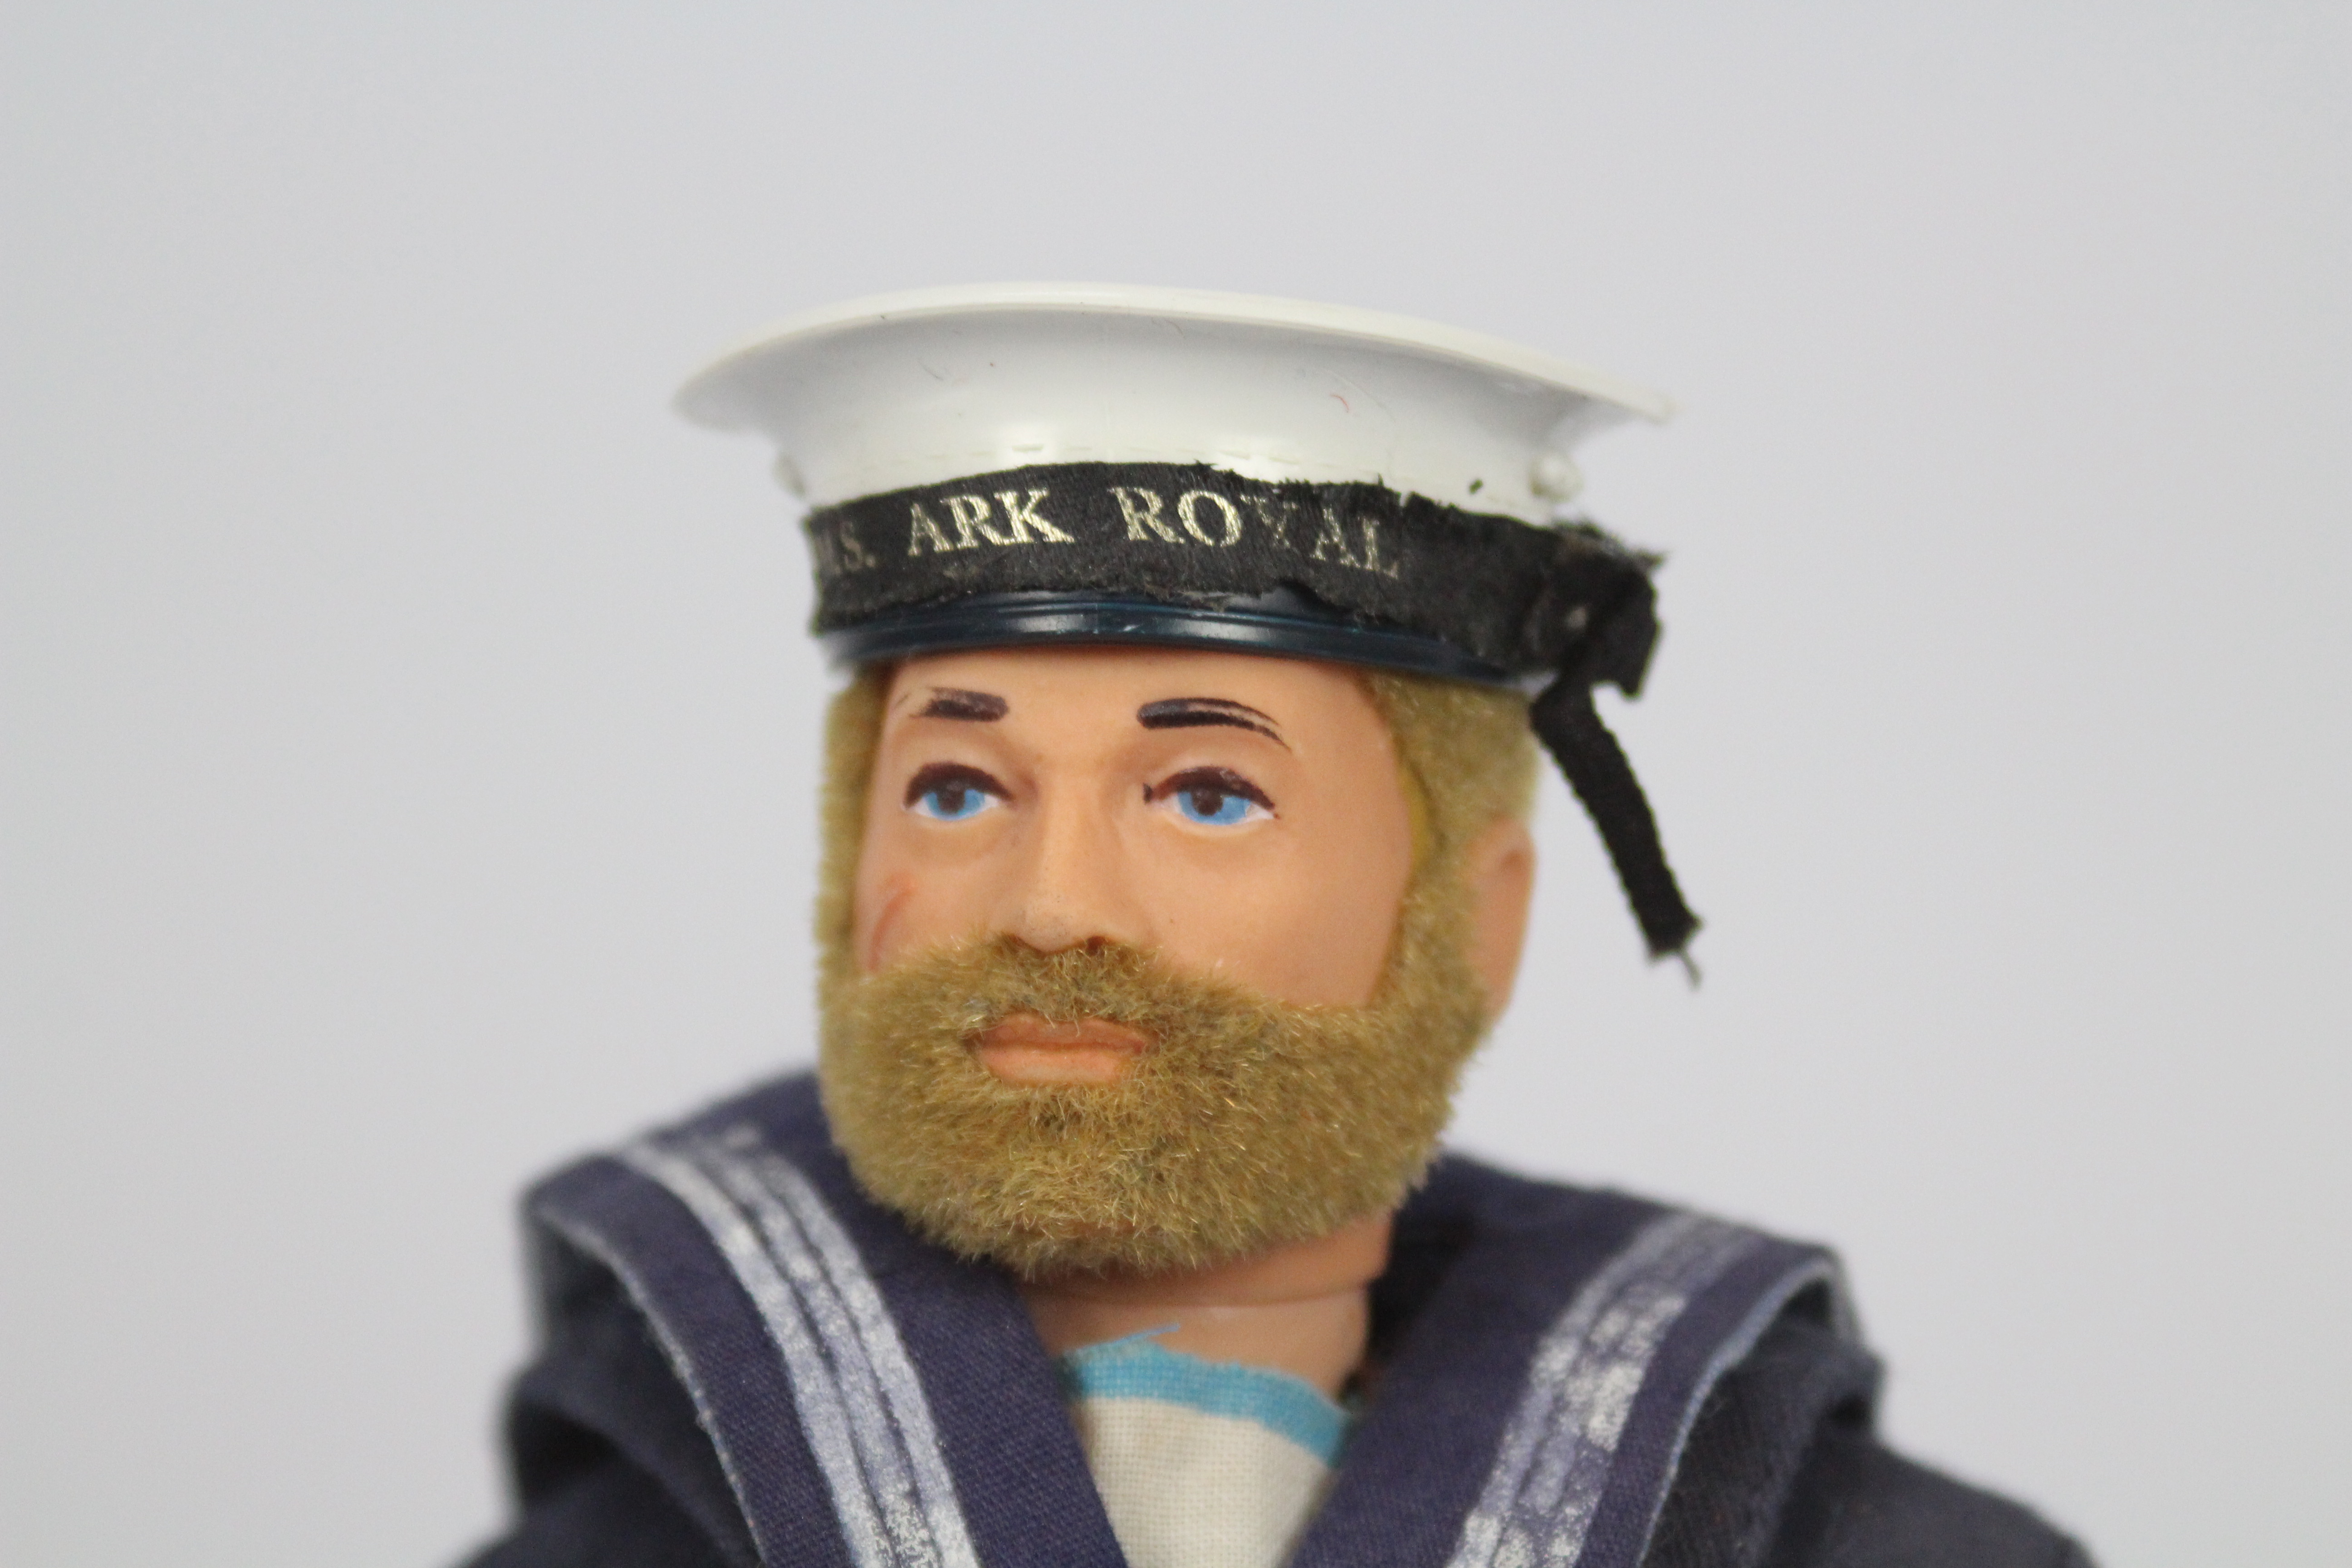 Palitoy, Action Man - A Palitoy Action Man figure in Sailor outfit. - Image 6 of 9